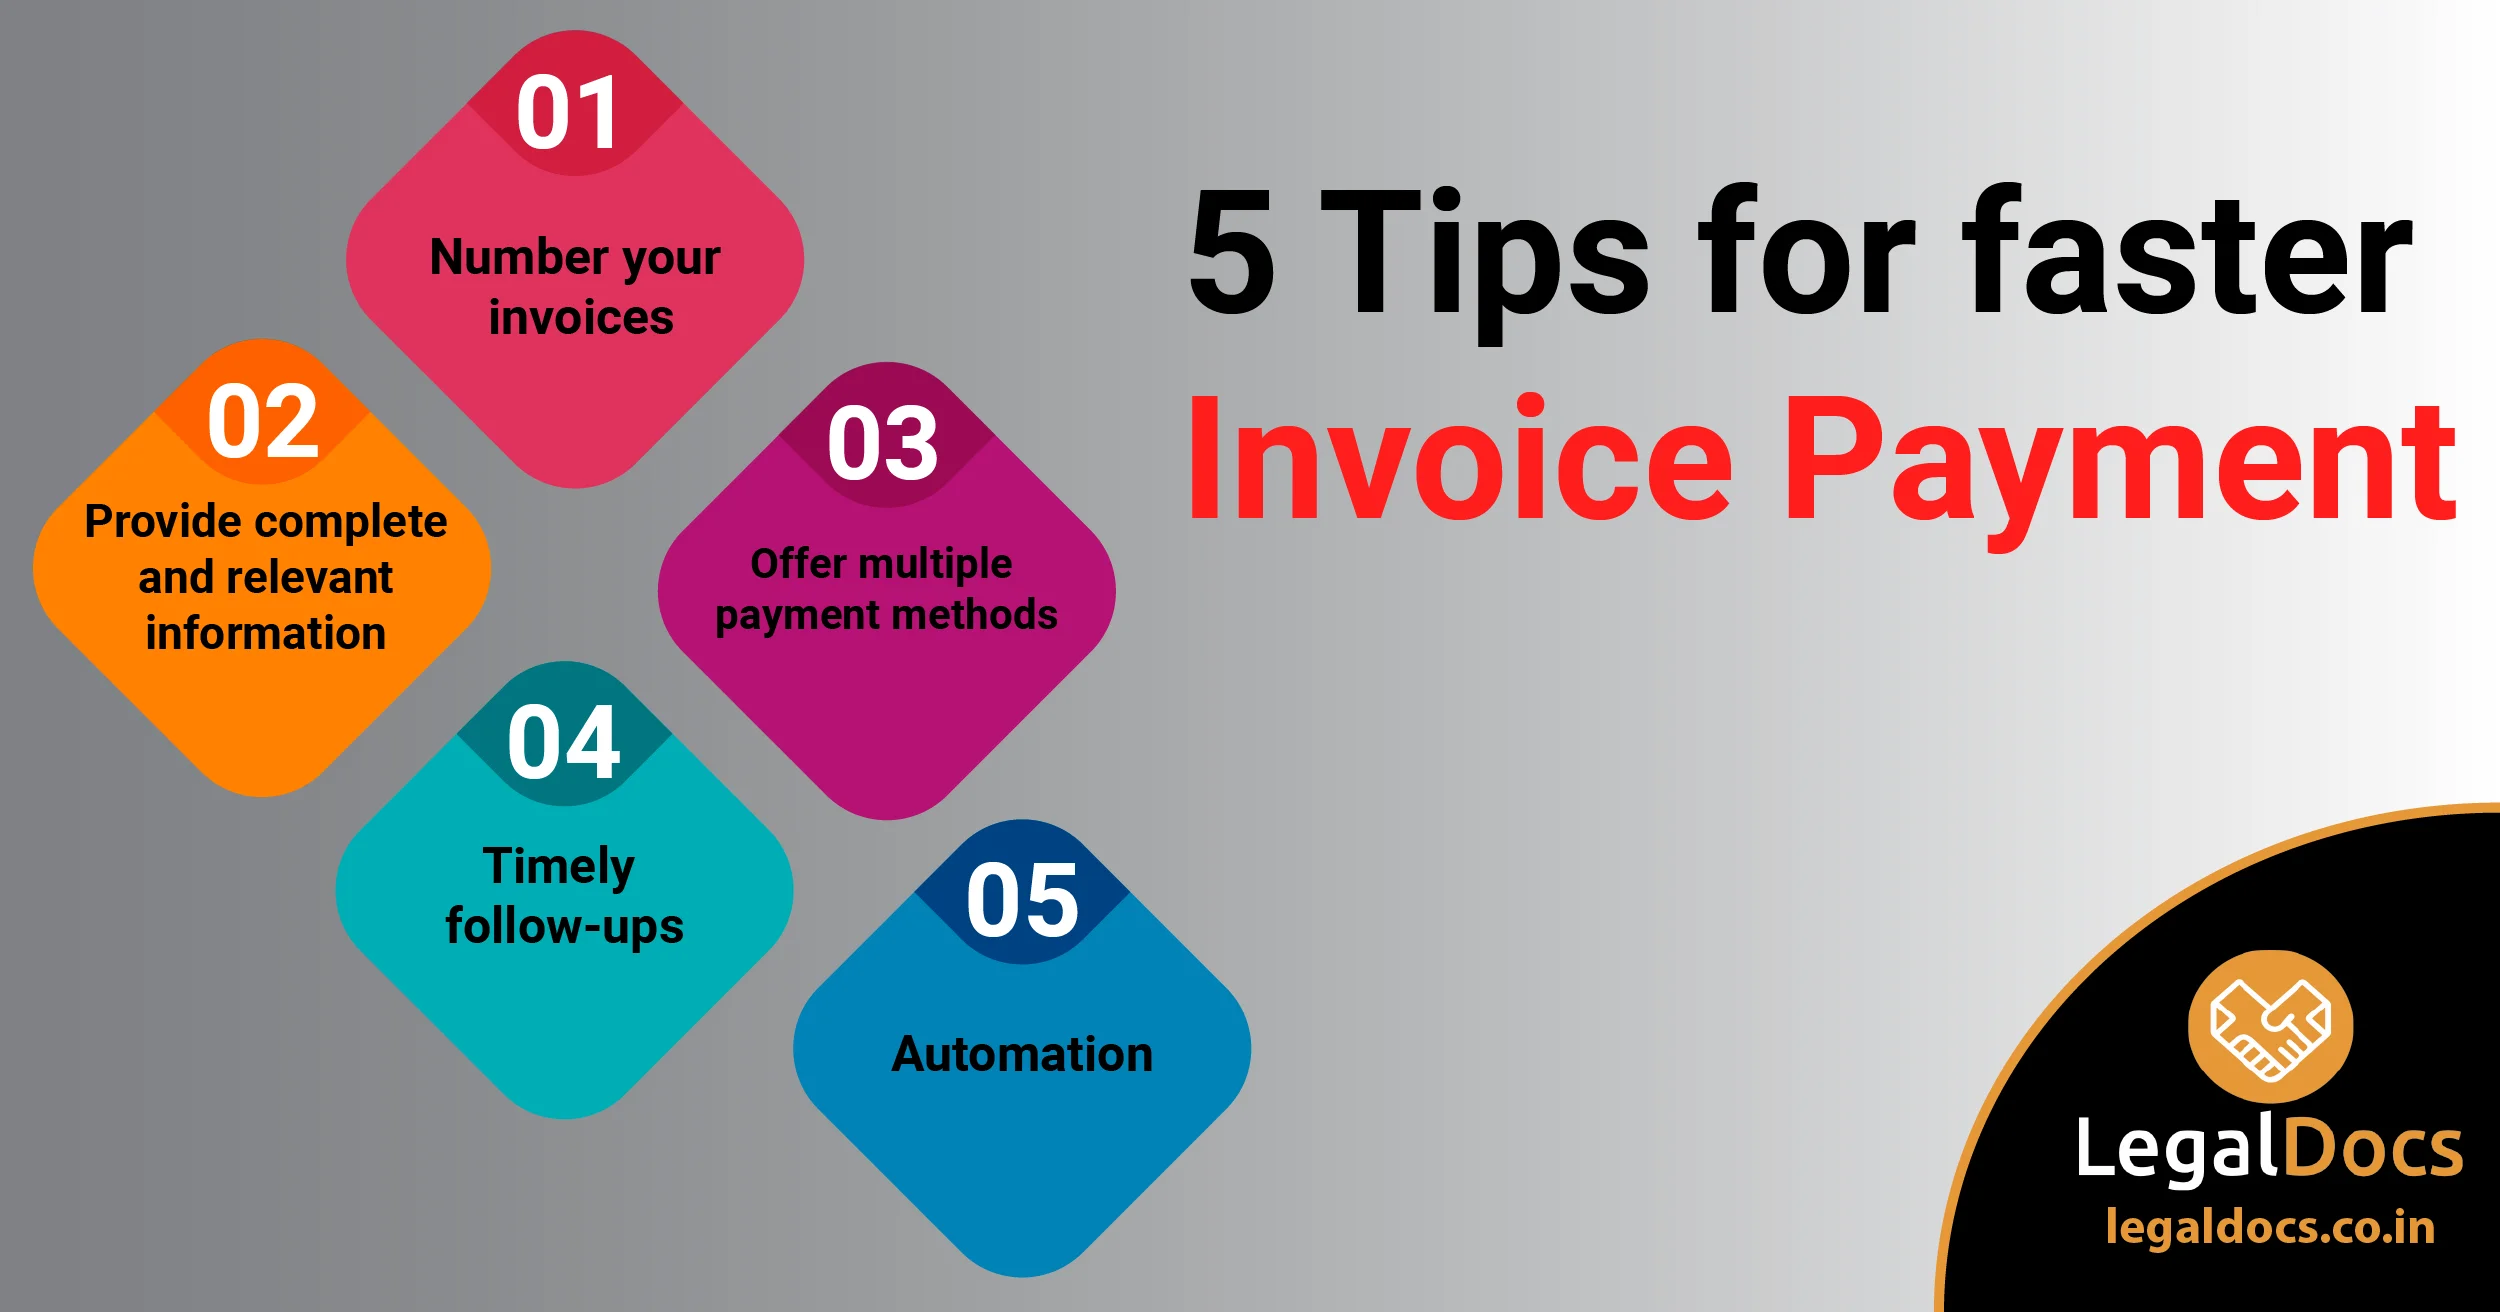 5 Tips for Faster Invoice Payment - LegalDocs